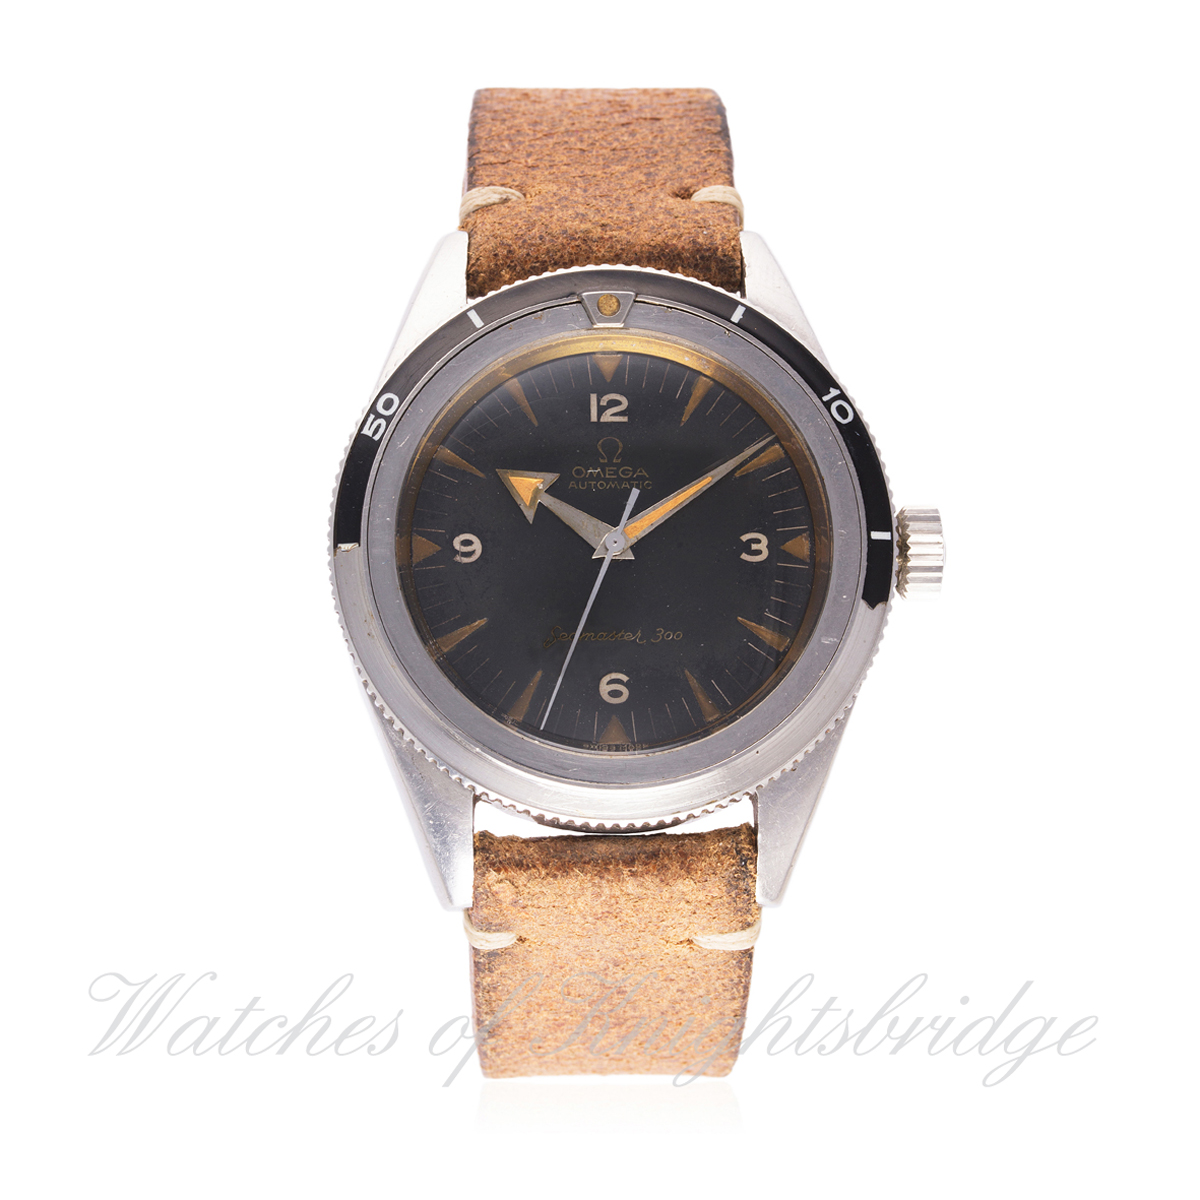 A RARE GENTLEMAN'S STAINLESS STEEL OMEGA SEAMASTER 300 AUTOMATIC WRIST WATCH CIRCA 1959, REF. 2913-1